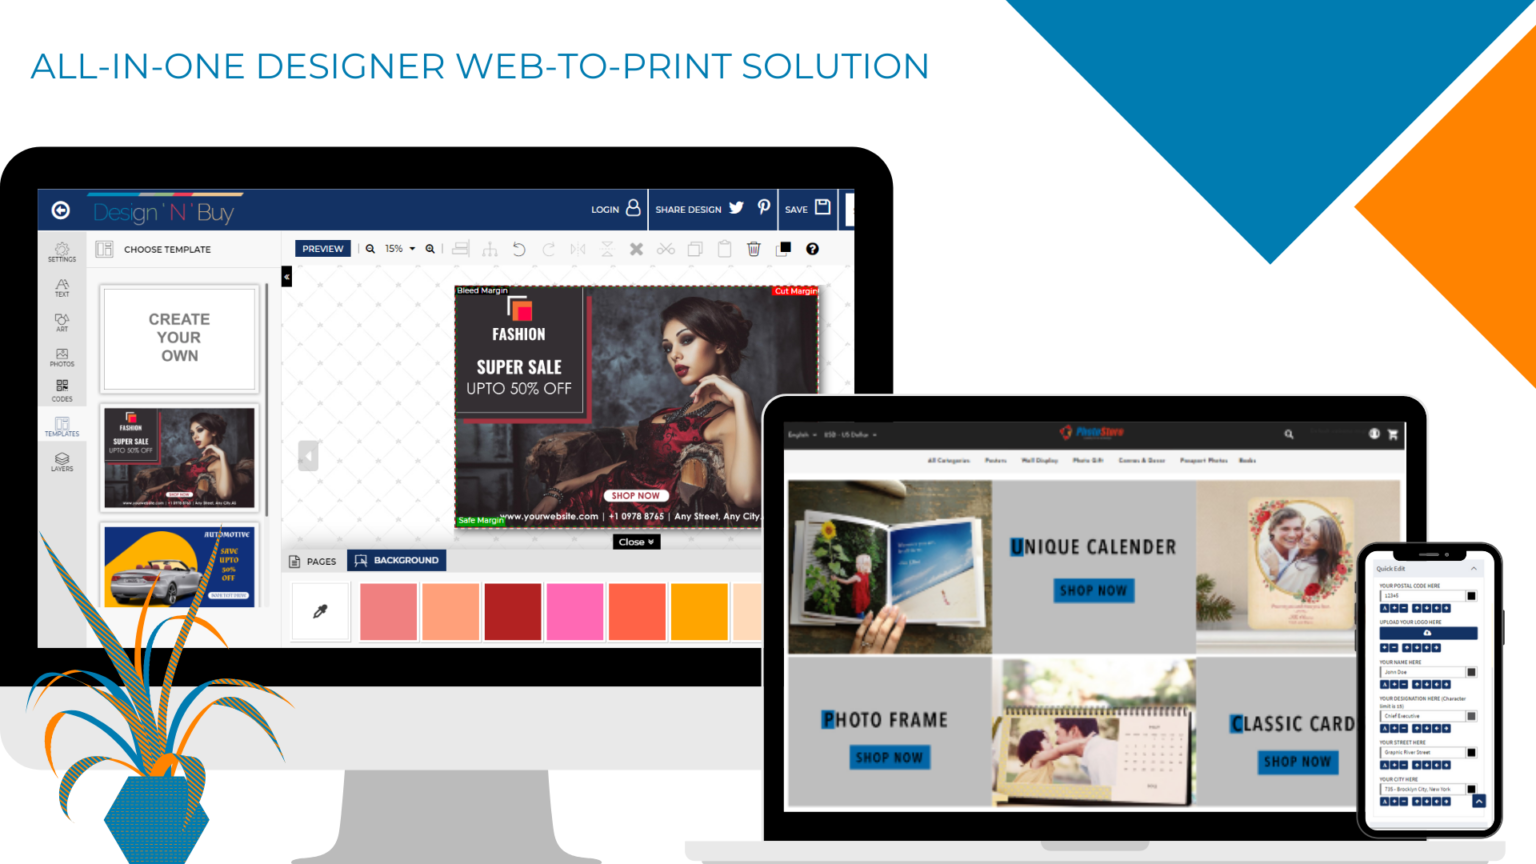 All-in-One Designer Web-to-Print Solution